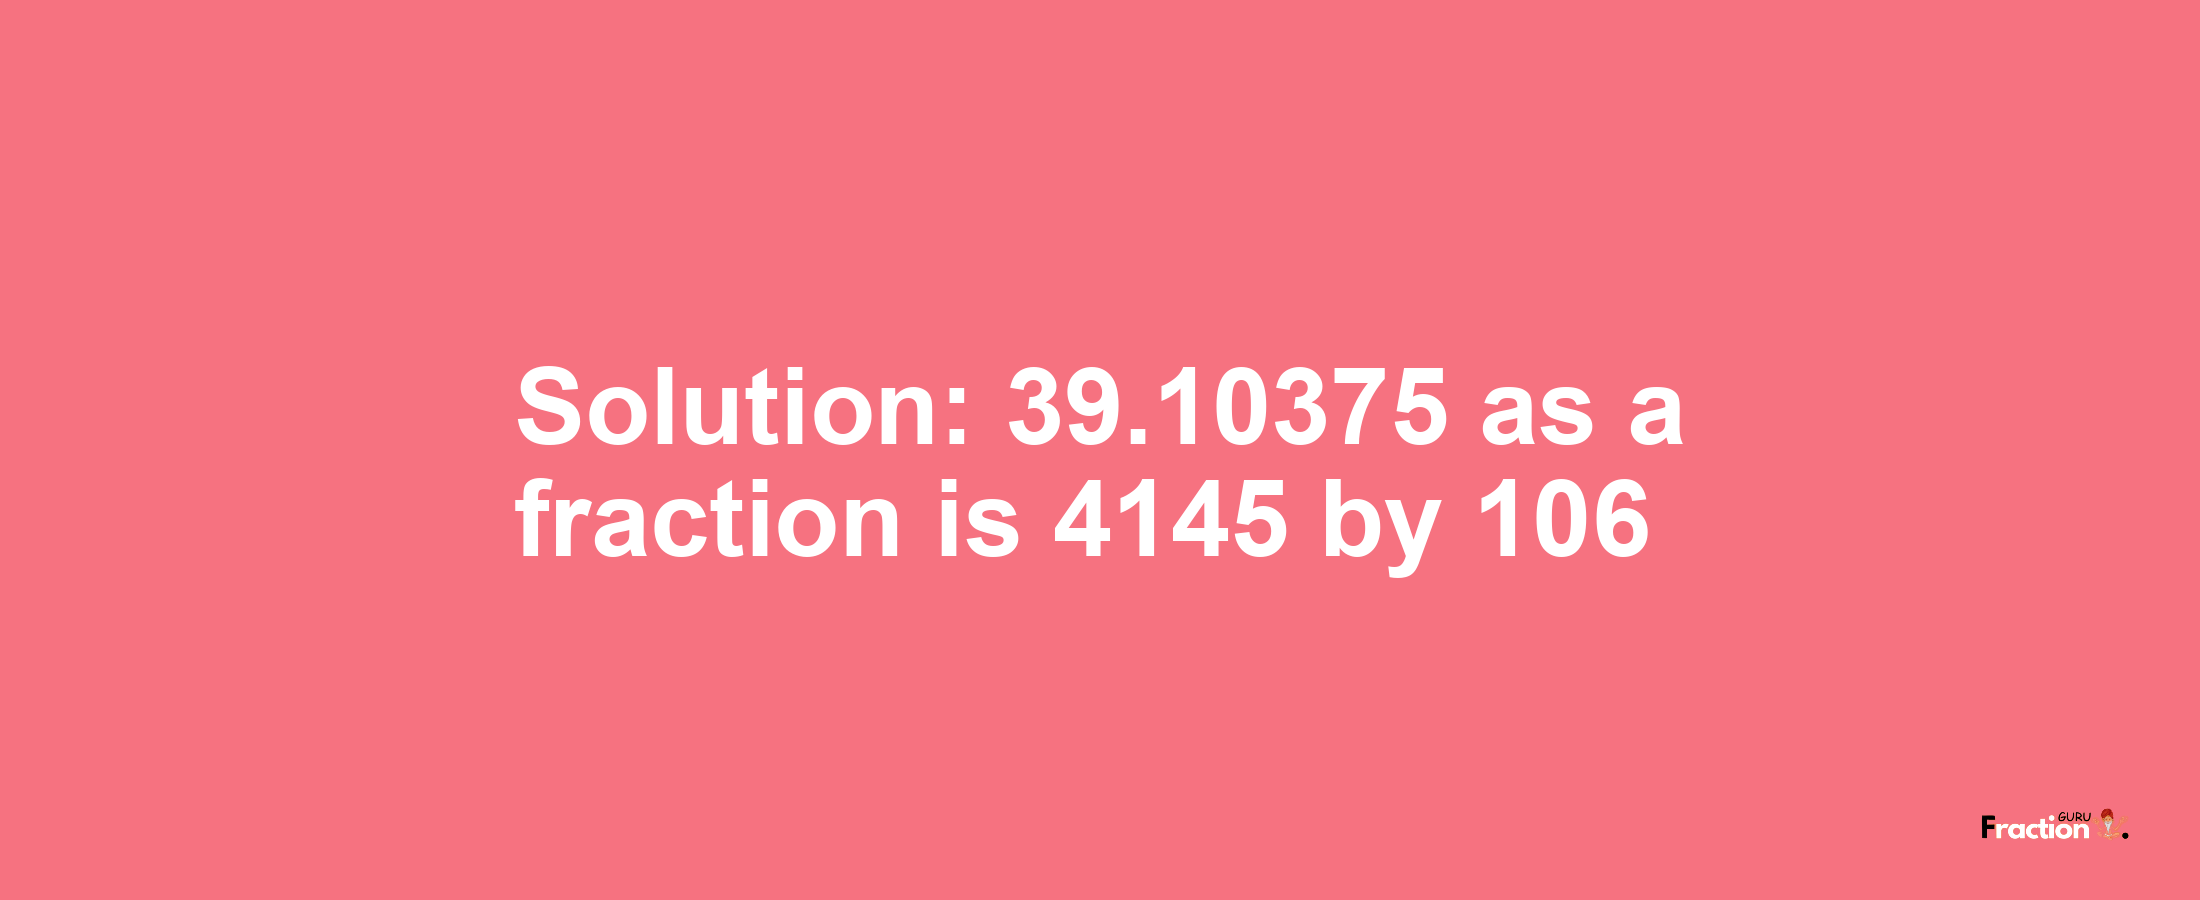 Solution:39.10375 as a fraction is 4145/106